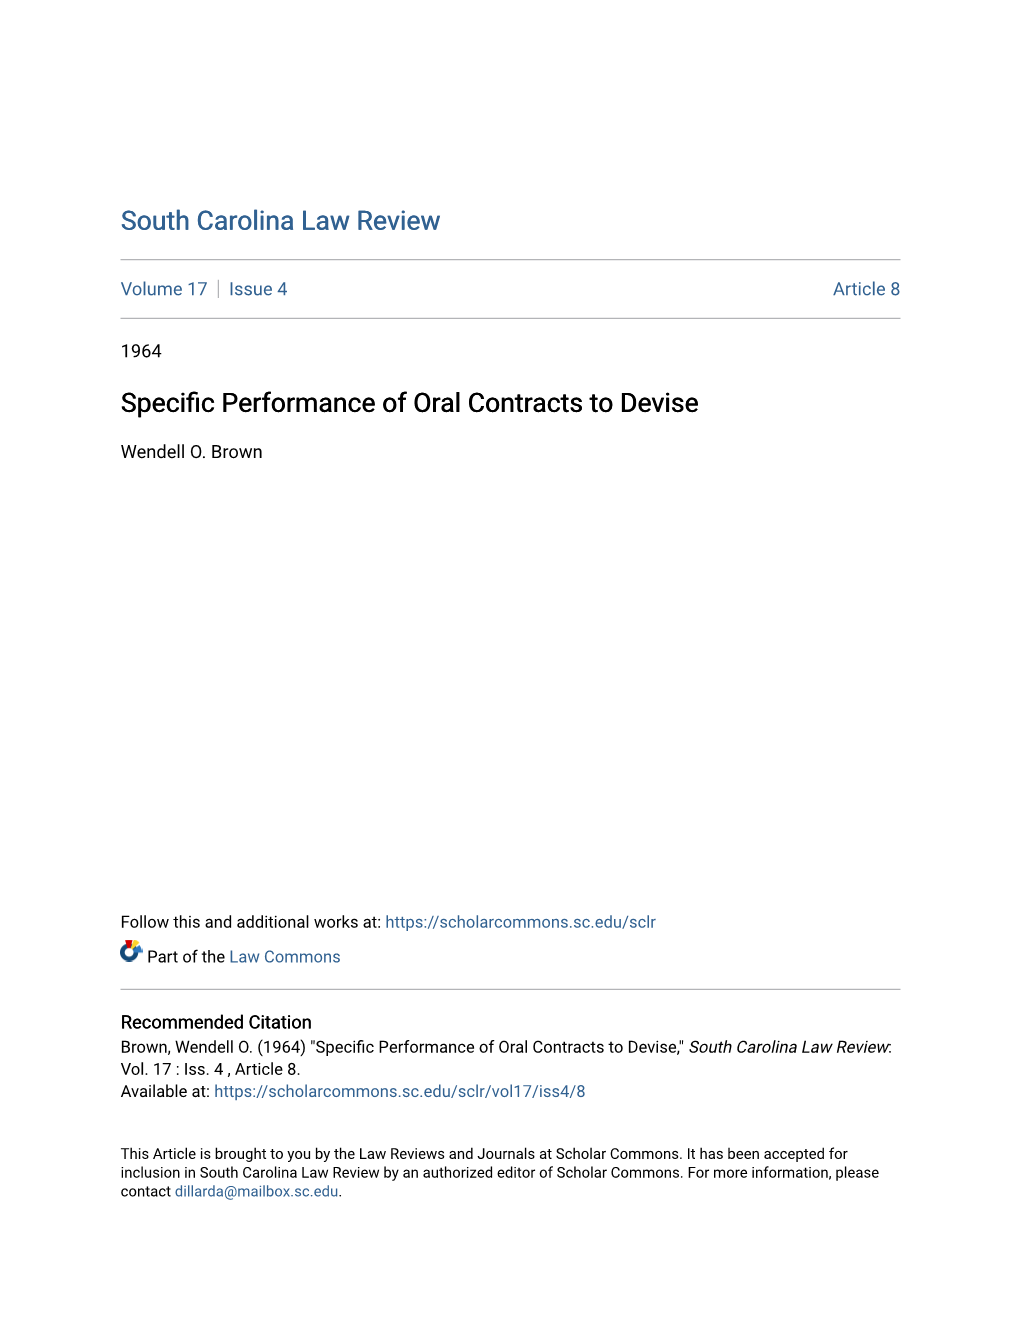 Specific Performance of Oral Contracts to Devise," South Carolina Law Review: Vol